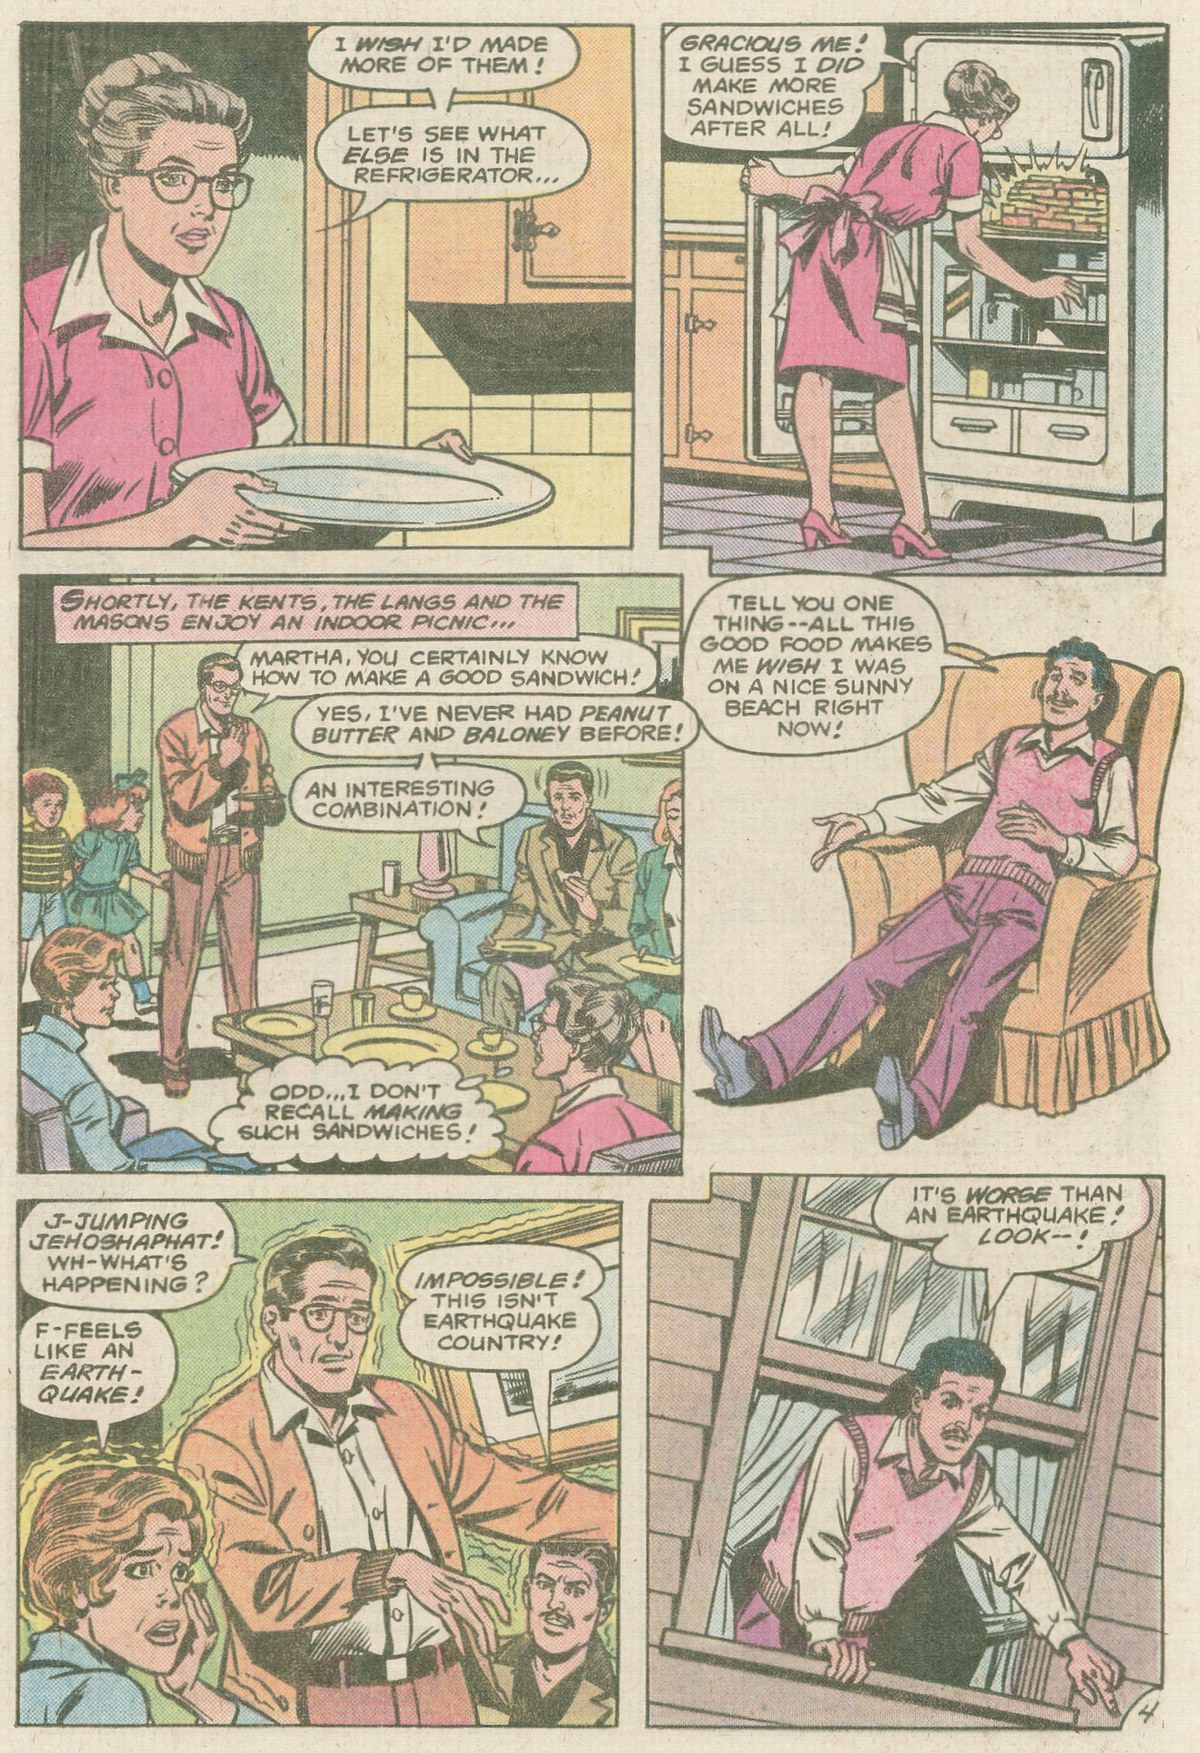 The New Adventures of Superboy 11 Page 21